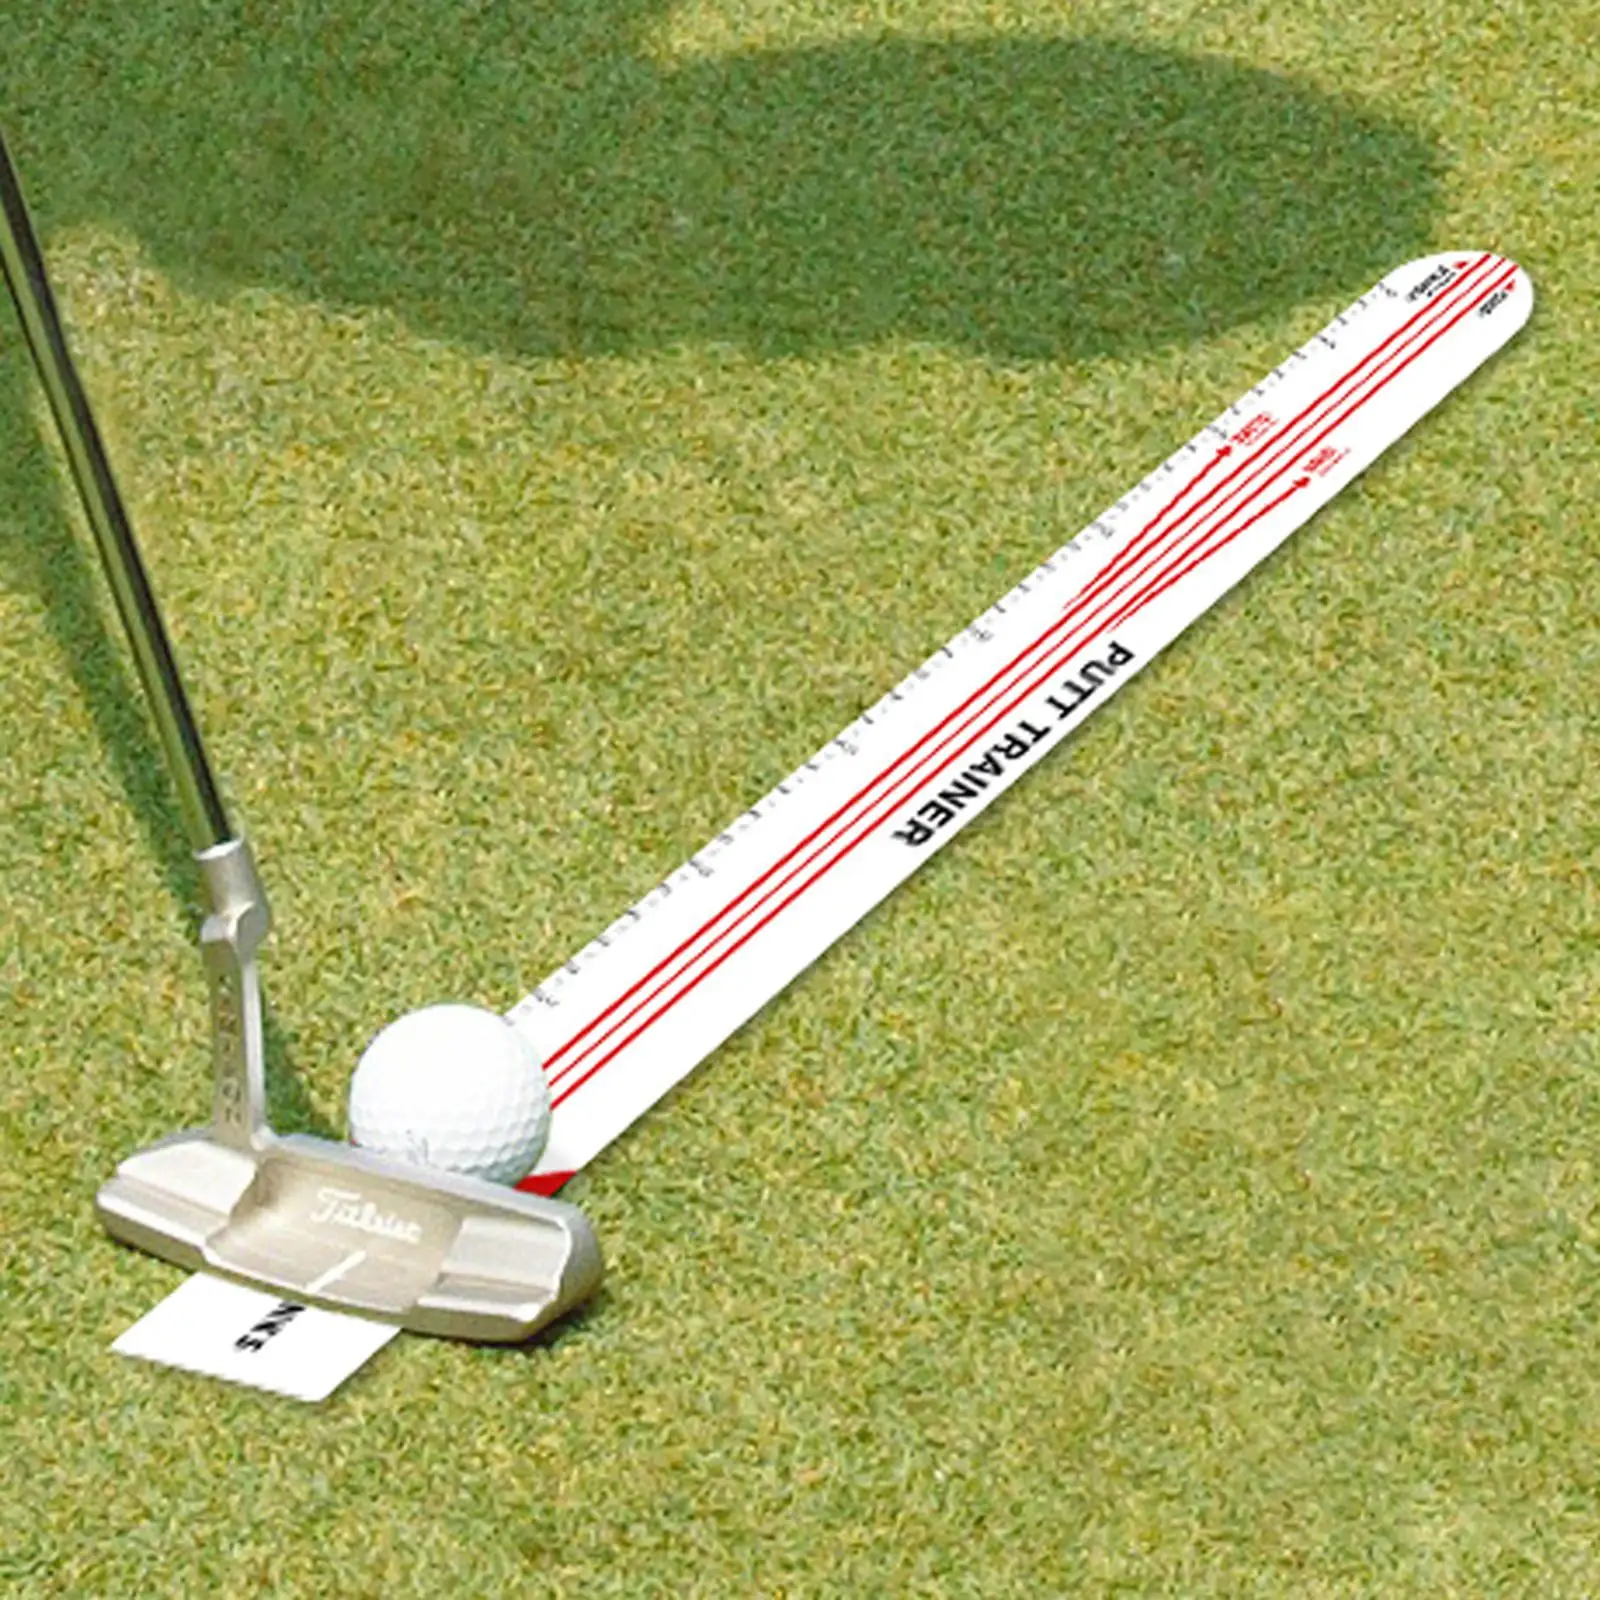 Golf Putter Check Putting Practice Trainer Aid Training Equipment Exerciser Portable for Outdoor Golfer Gift Golf Accessories